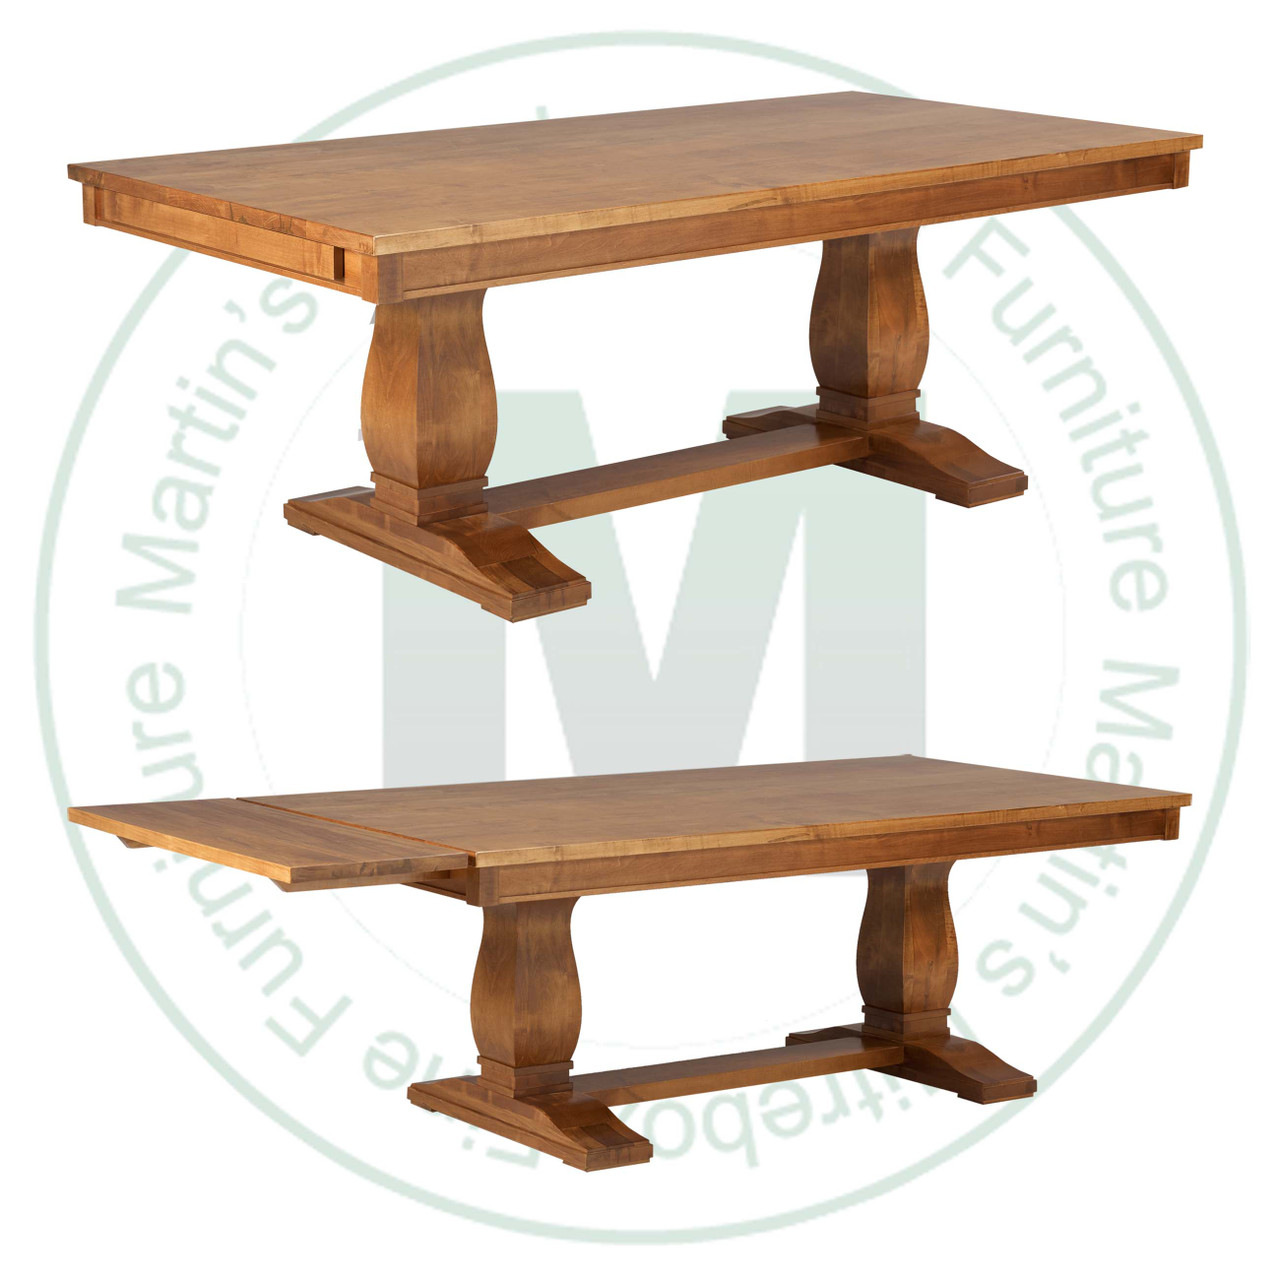 Maple Madrid Solid Top Double Pedestal Table 42''D x 84''W x 30''H With 2 - 16'' Leaves On End Table Has 1'' Thick Top